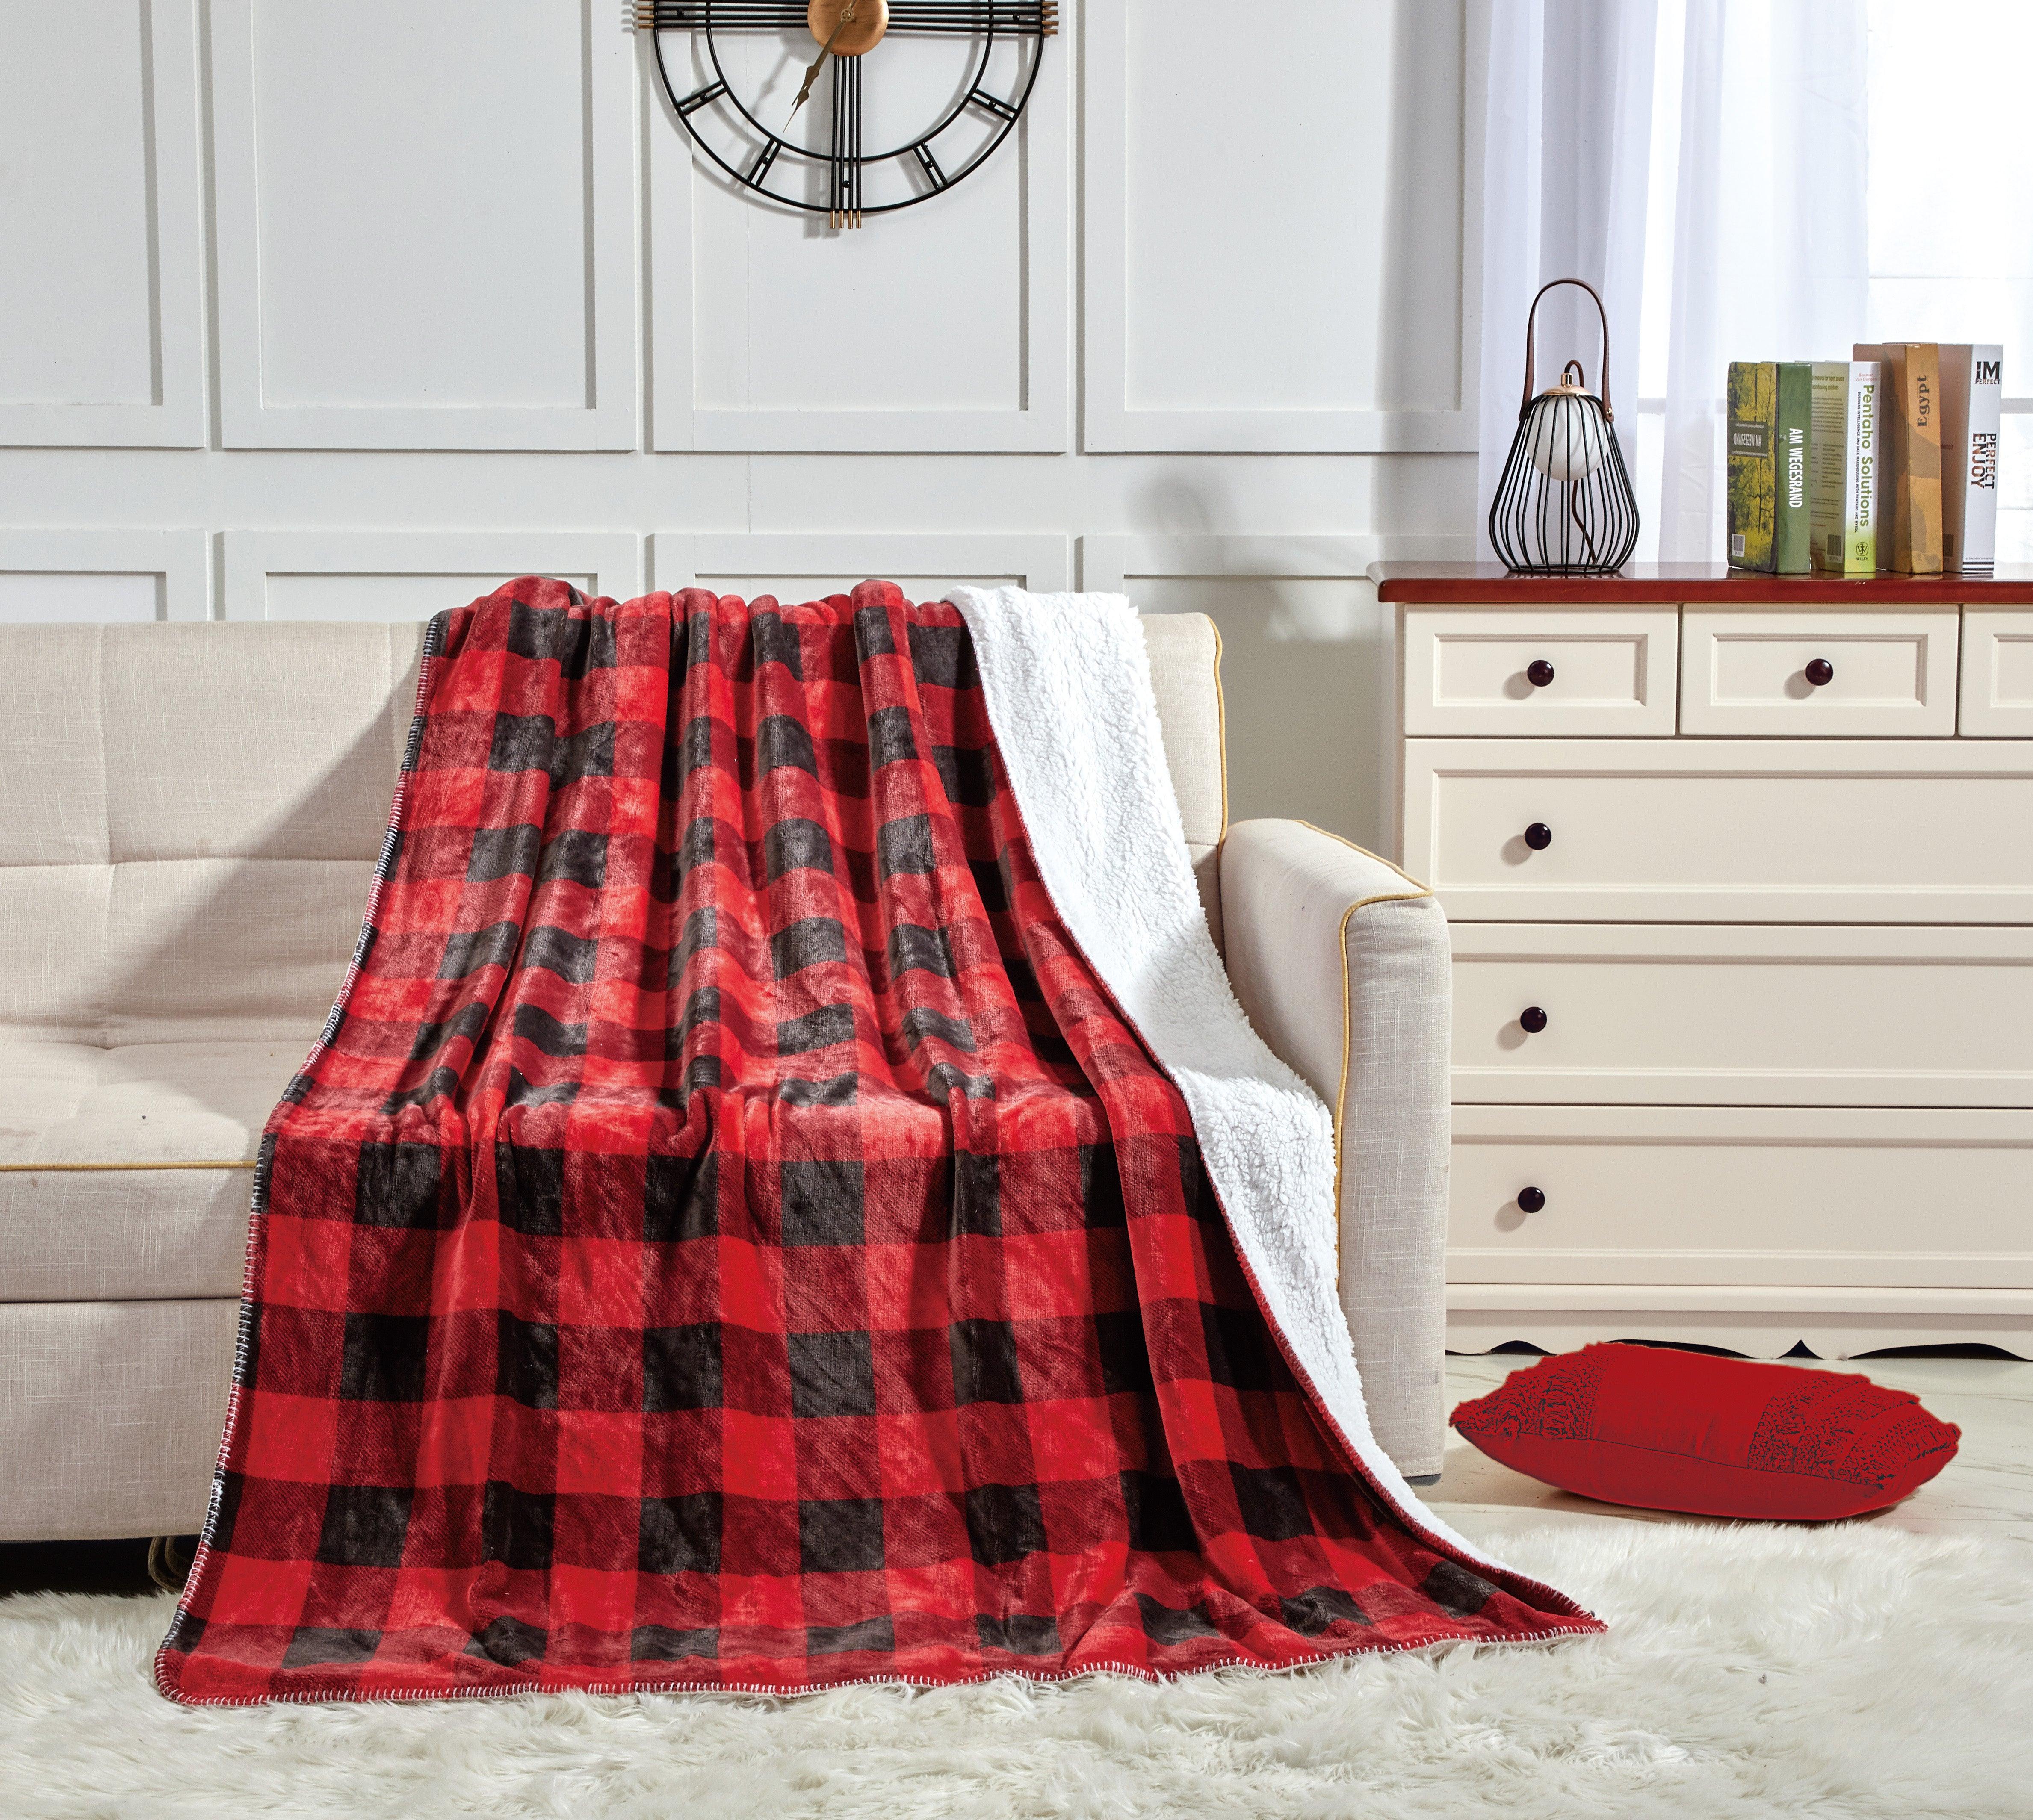 Ultra Soft Oversized Plush Altitude Throw Blanket - Stylish Home Décor for Bed or Couch - Spirit Linen